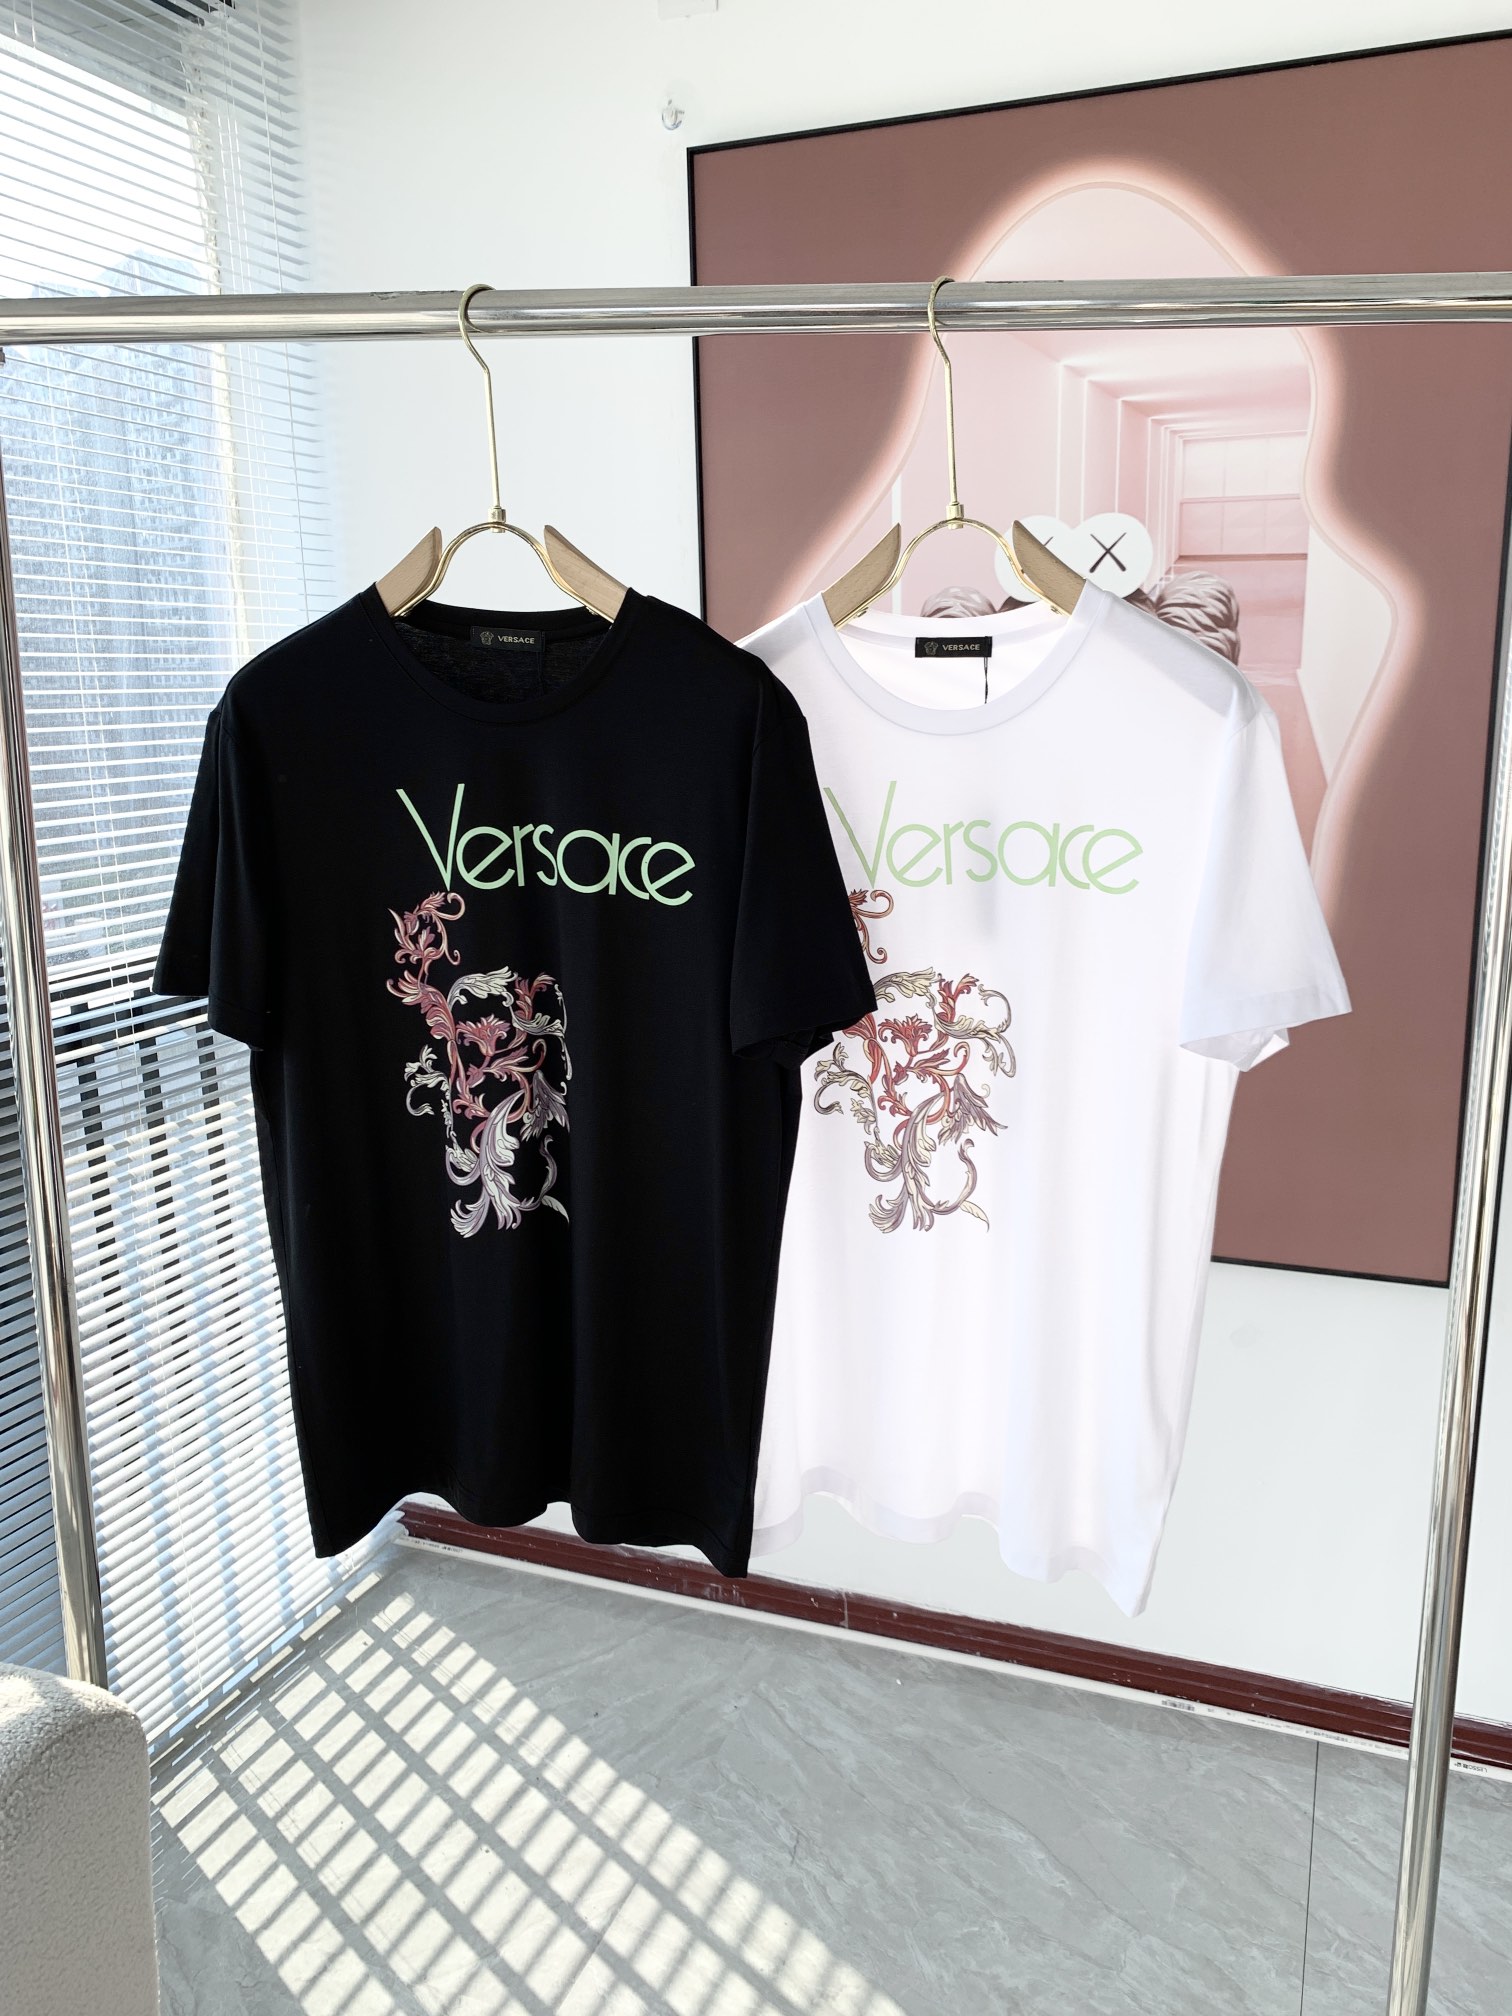 Online From China
 Versace Clothing T-Shirt Unisex Cotton Spring/Summer Collection Short Sleeve